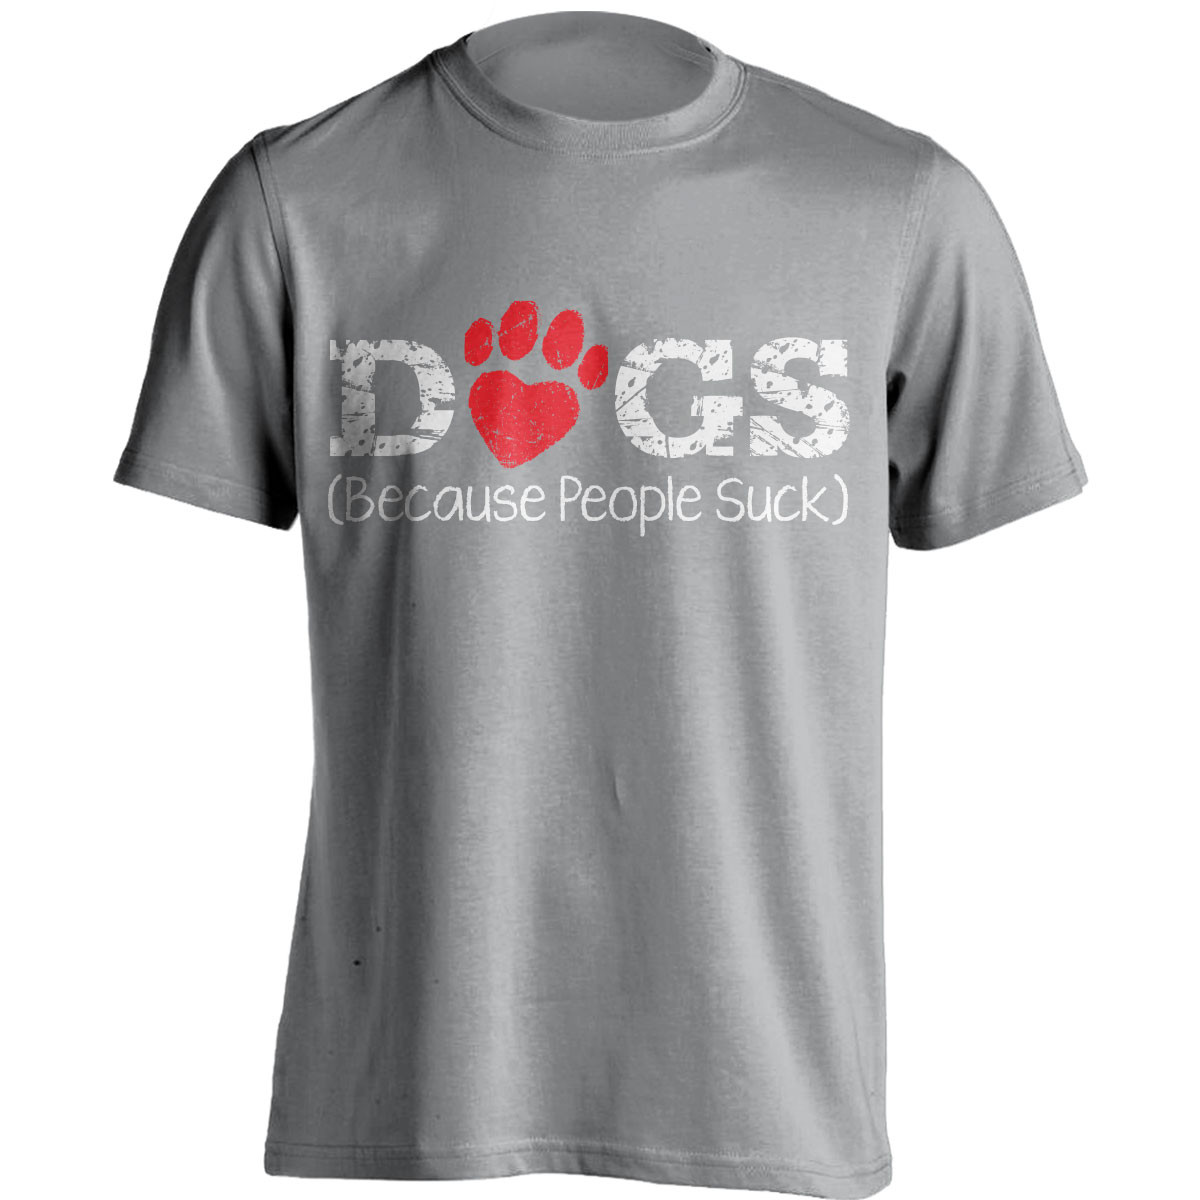 "Dogs Because People Suck" T-Shirt